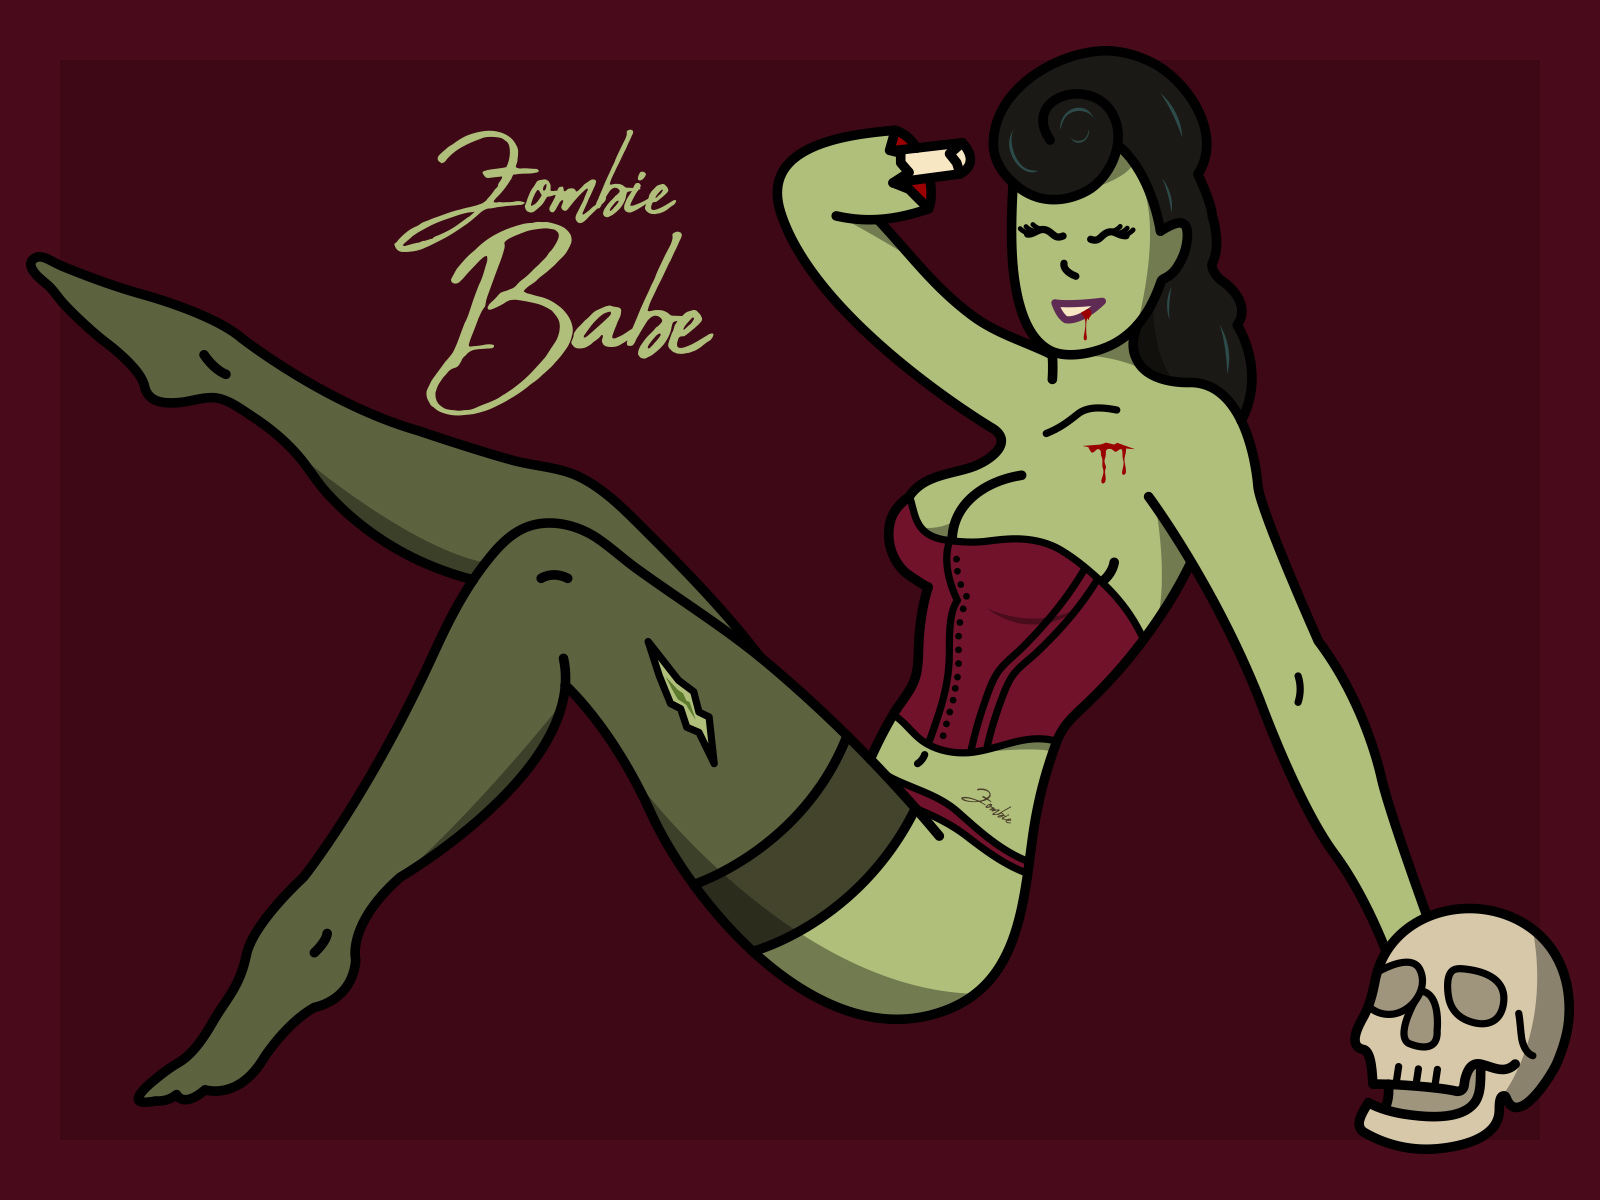 Zombie Babe Pin Up By Westley Ferguson On Dribbble